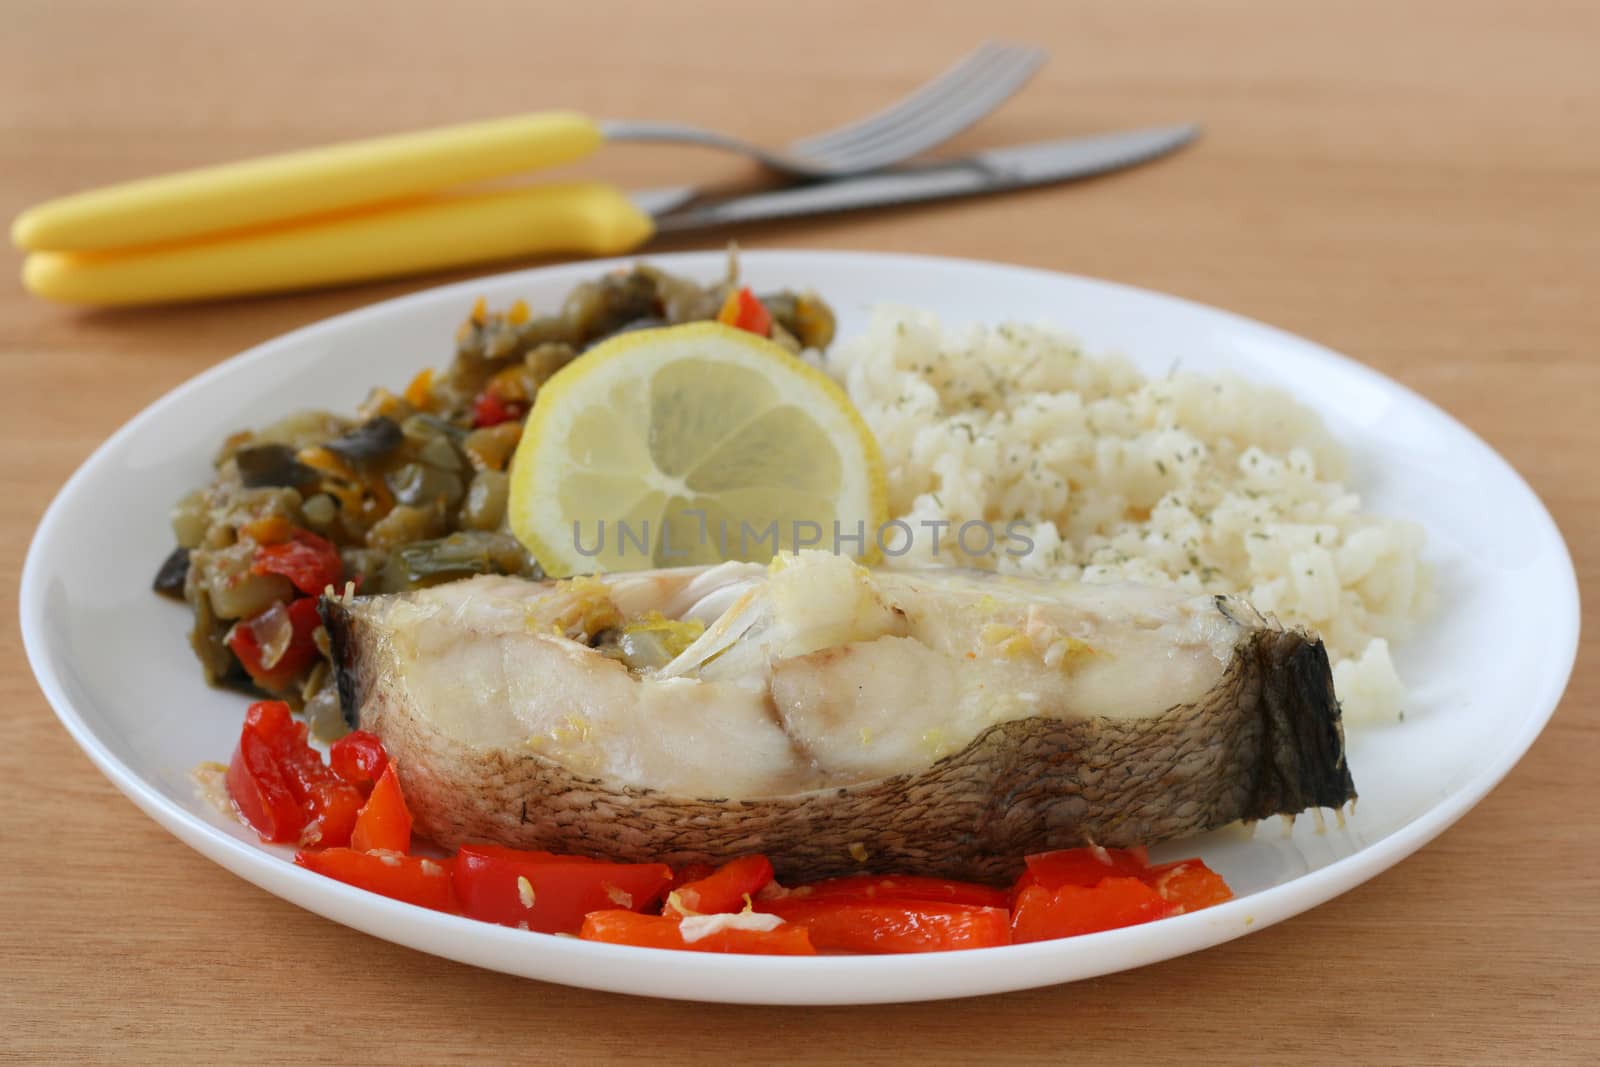 boiled fish with rice and vegetables